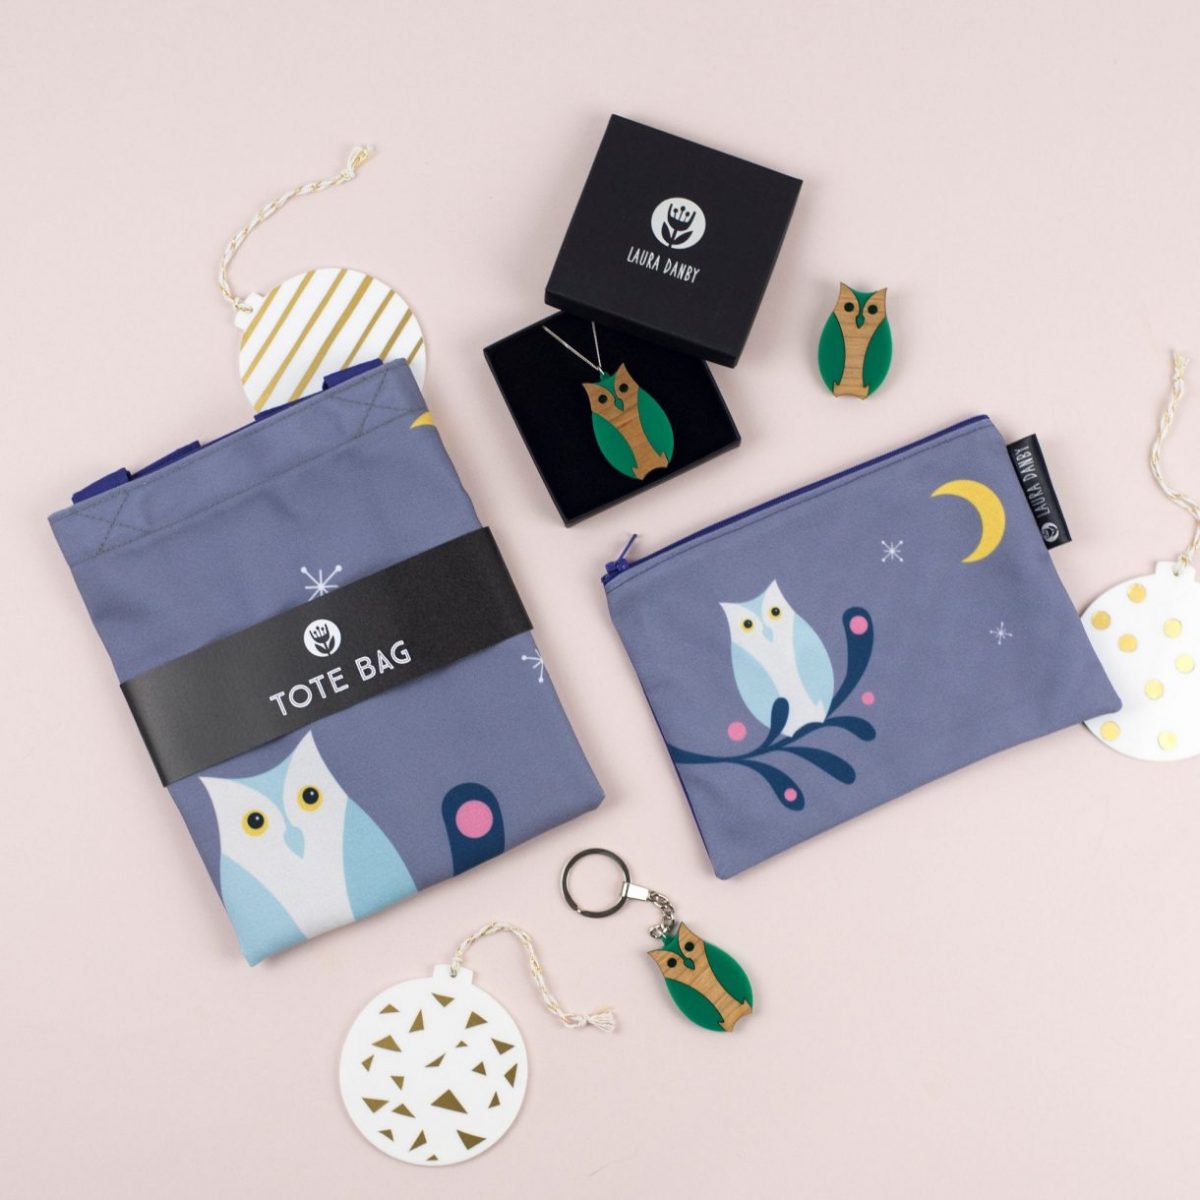 Owl Bird Gift Set, Tote Bag, Pencil Case, Necklace, Brooch & Keyring Gift Set For Her, For Women, For Christmas, Fun Bird Gifts For Kids